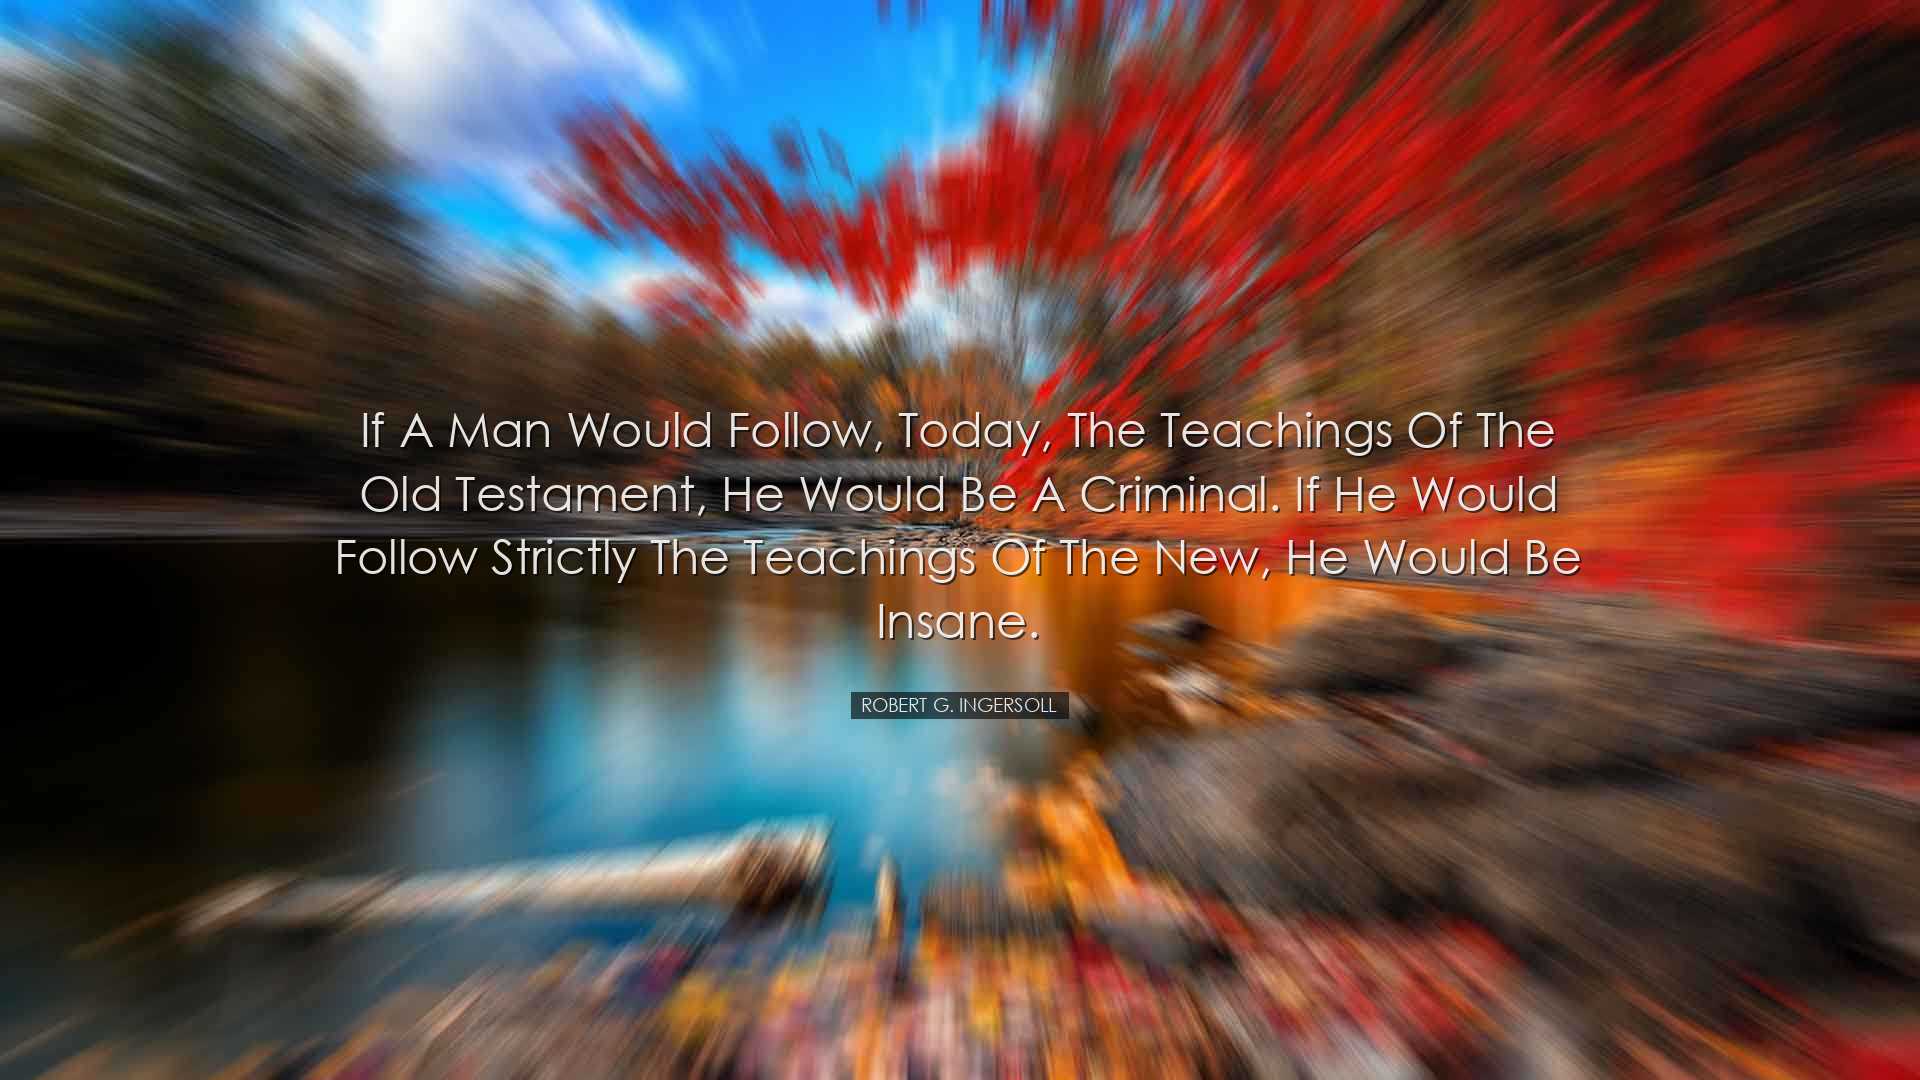 If a man would follow, today, the teachings of the Old Testament,